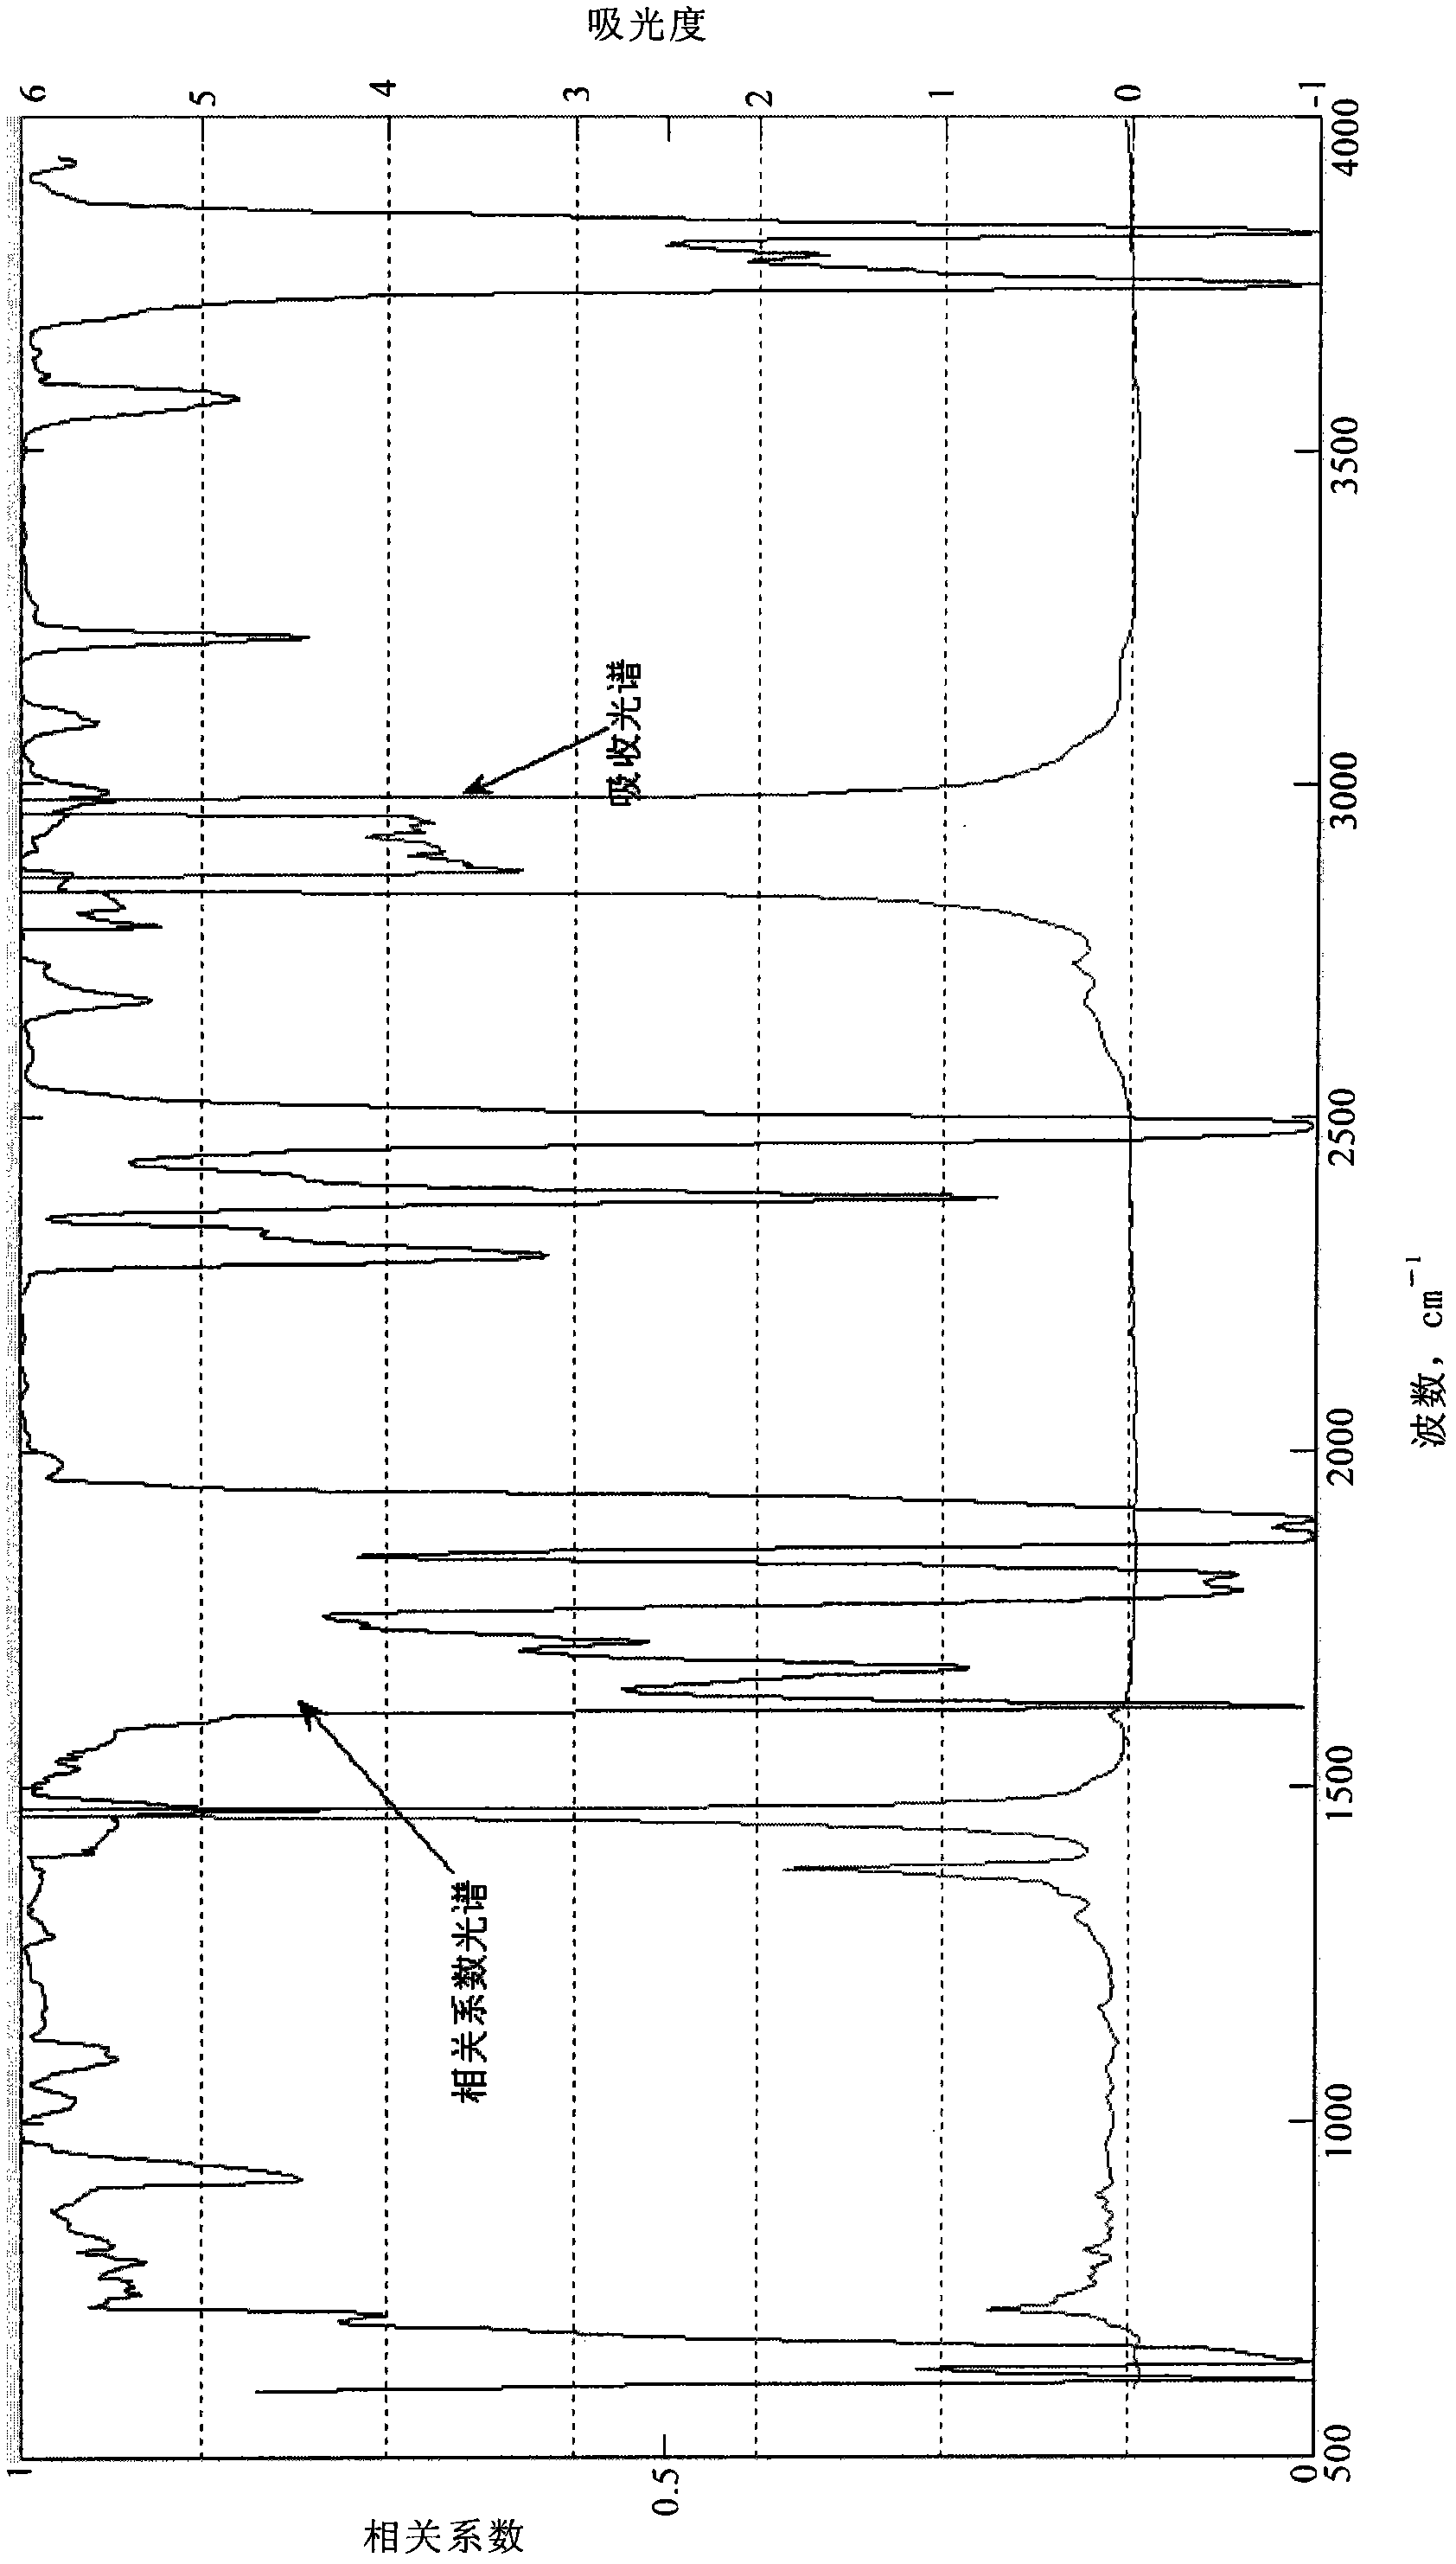 Mid-infrared spectrum method for quickly identifying engine fuel type